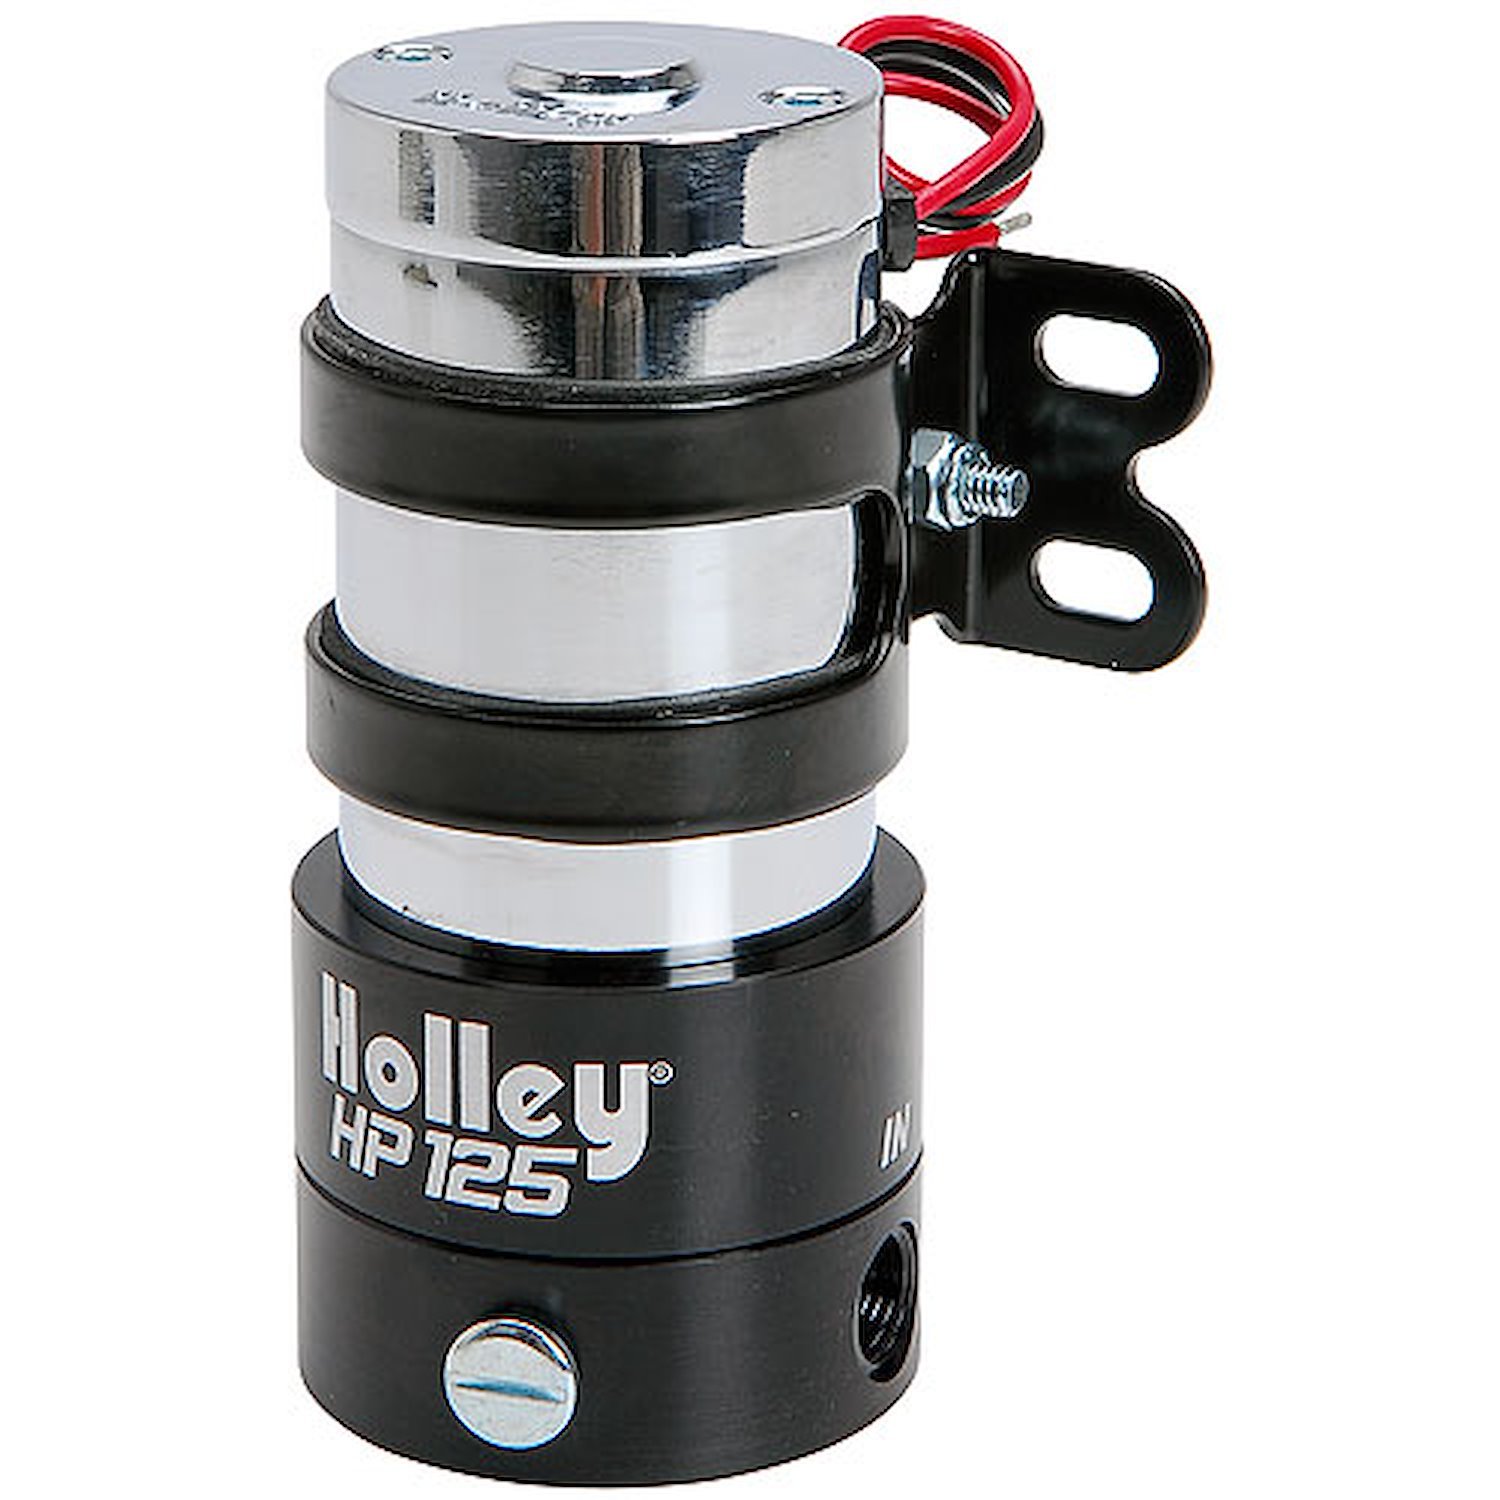 12-125 HP 125 Electric Fuel Pump 110 GPH @ 7 psi Internally regulated to 7 psi Up to 700HP